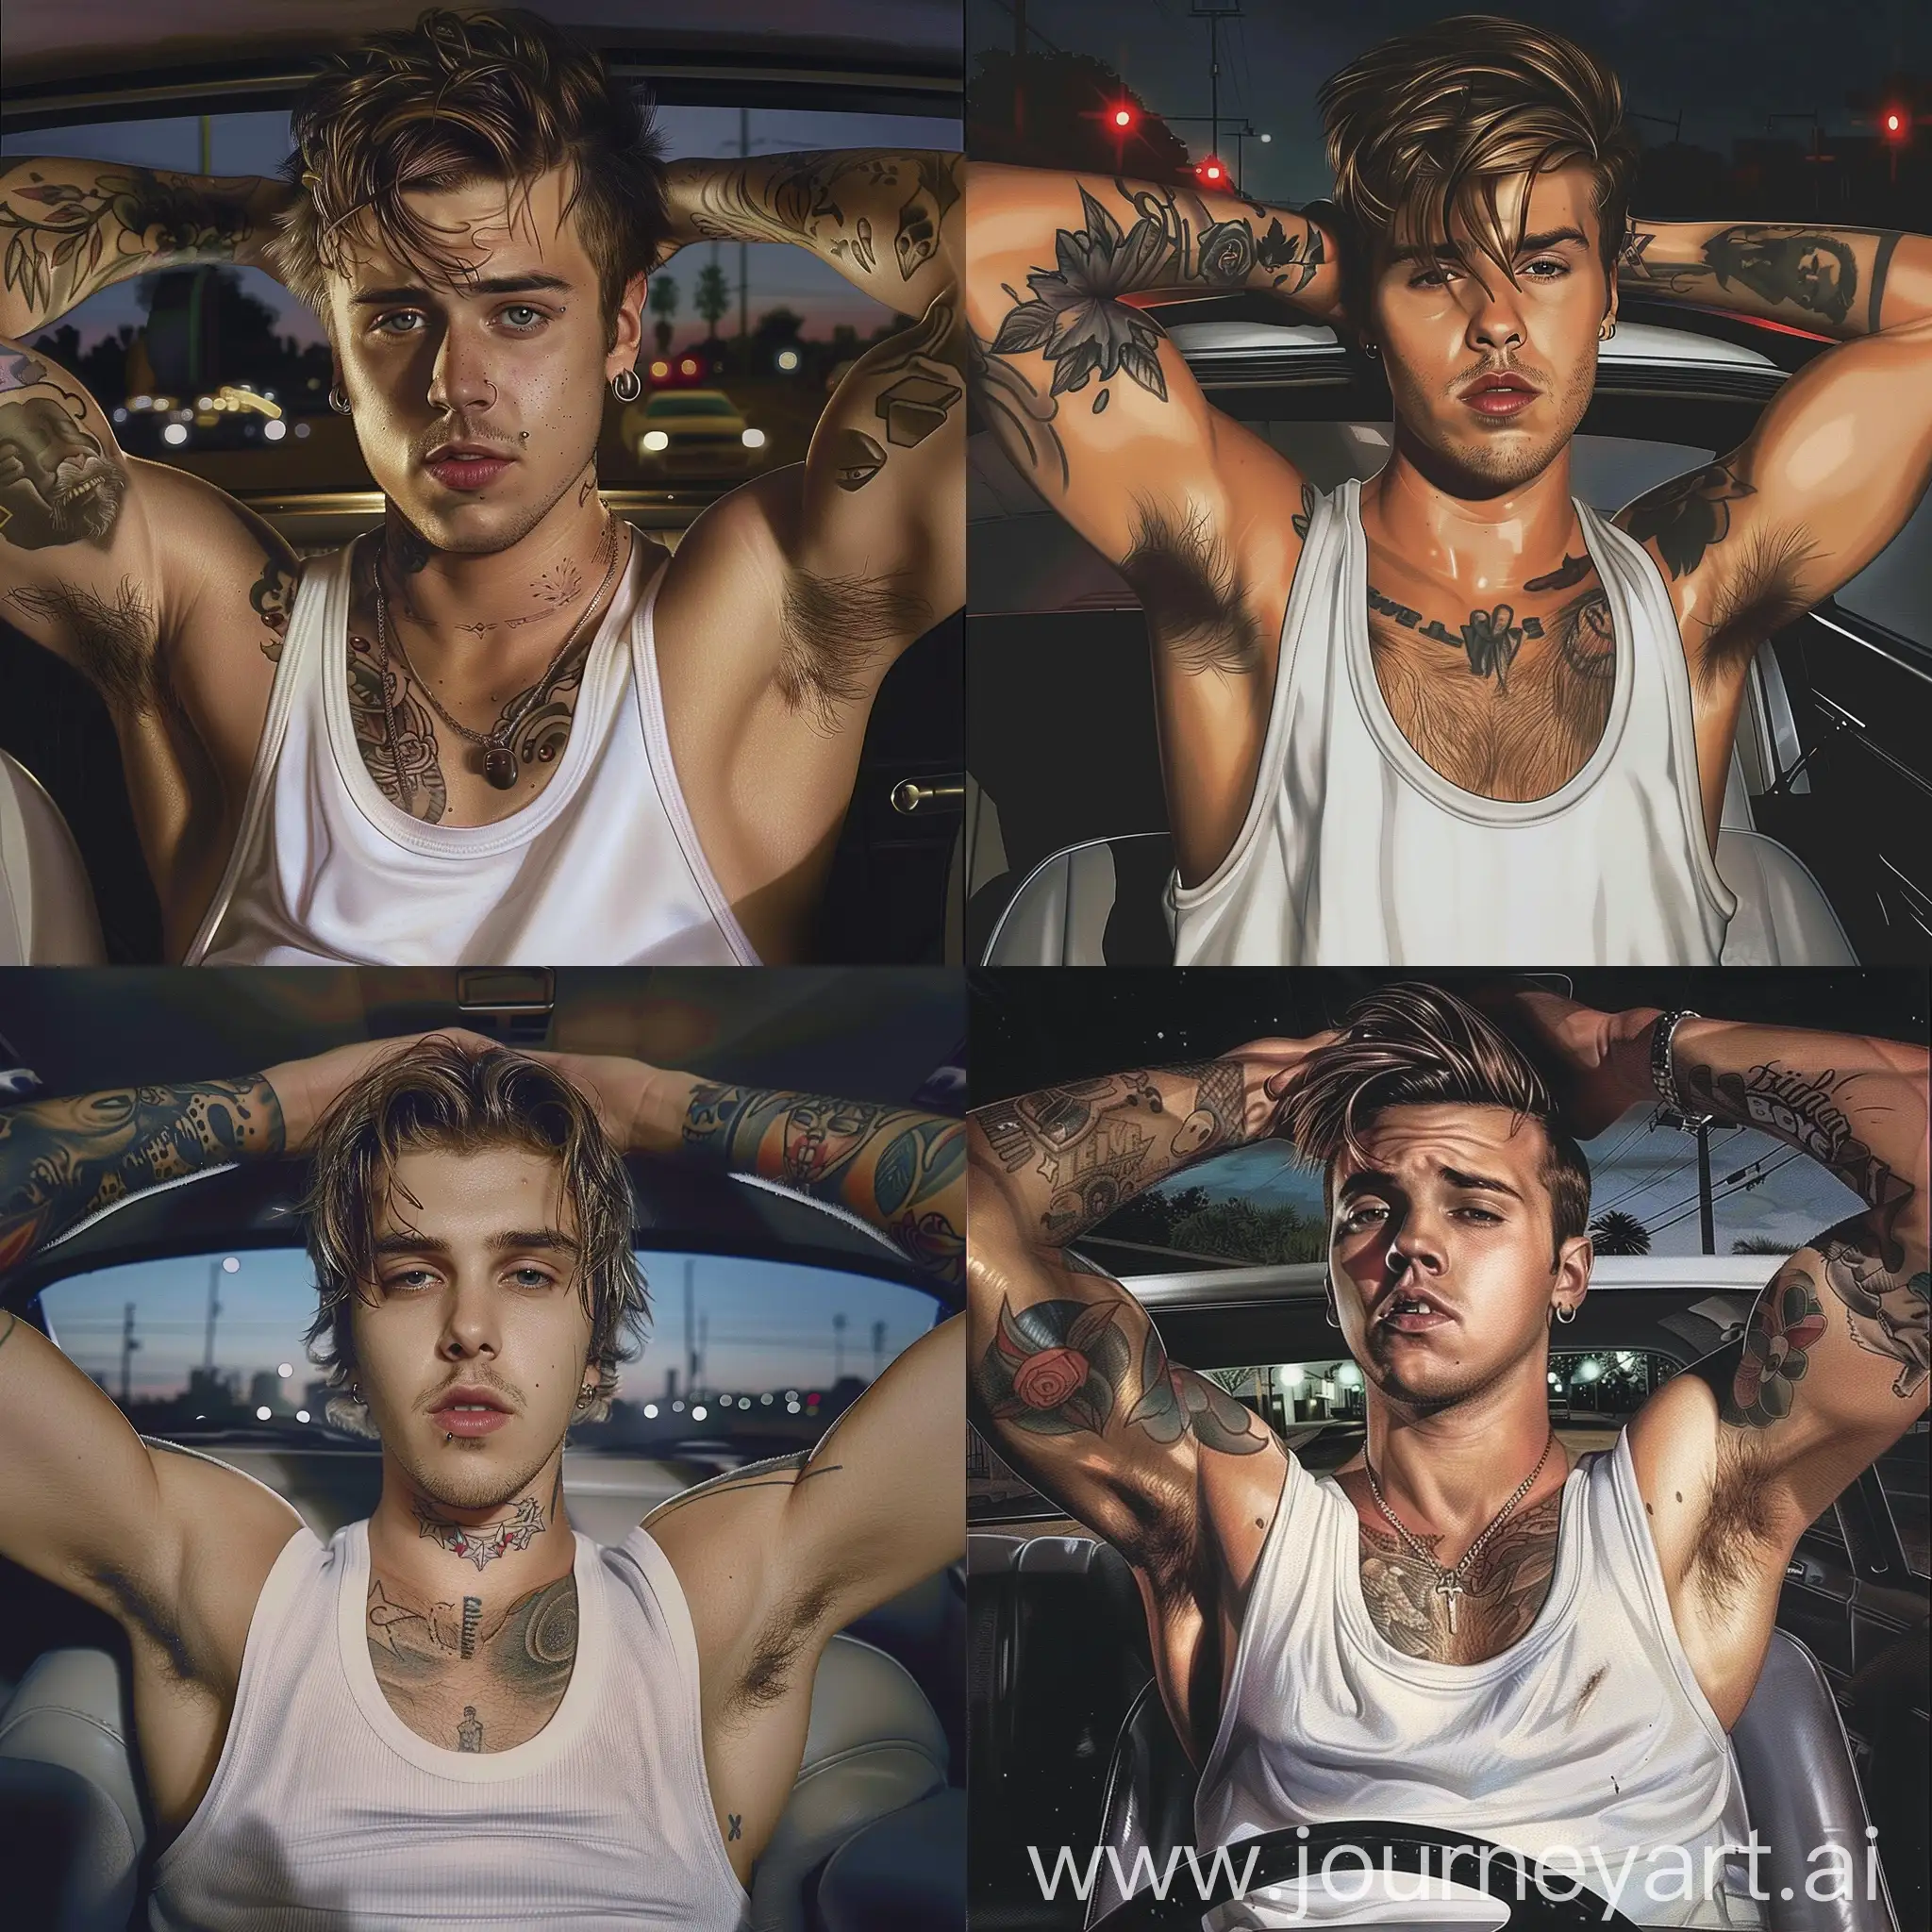 Handsome-Justin-Bieber-Poses-in-Car-at-Night-Revealing-Tattooed-Arms-and-Hairy-Armpits